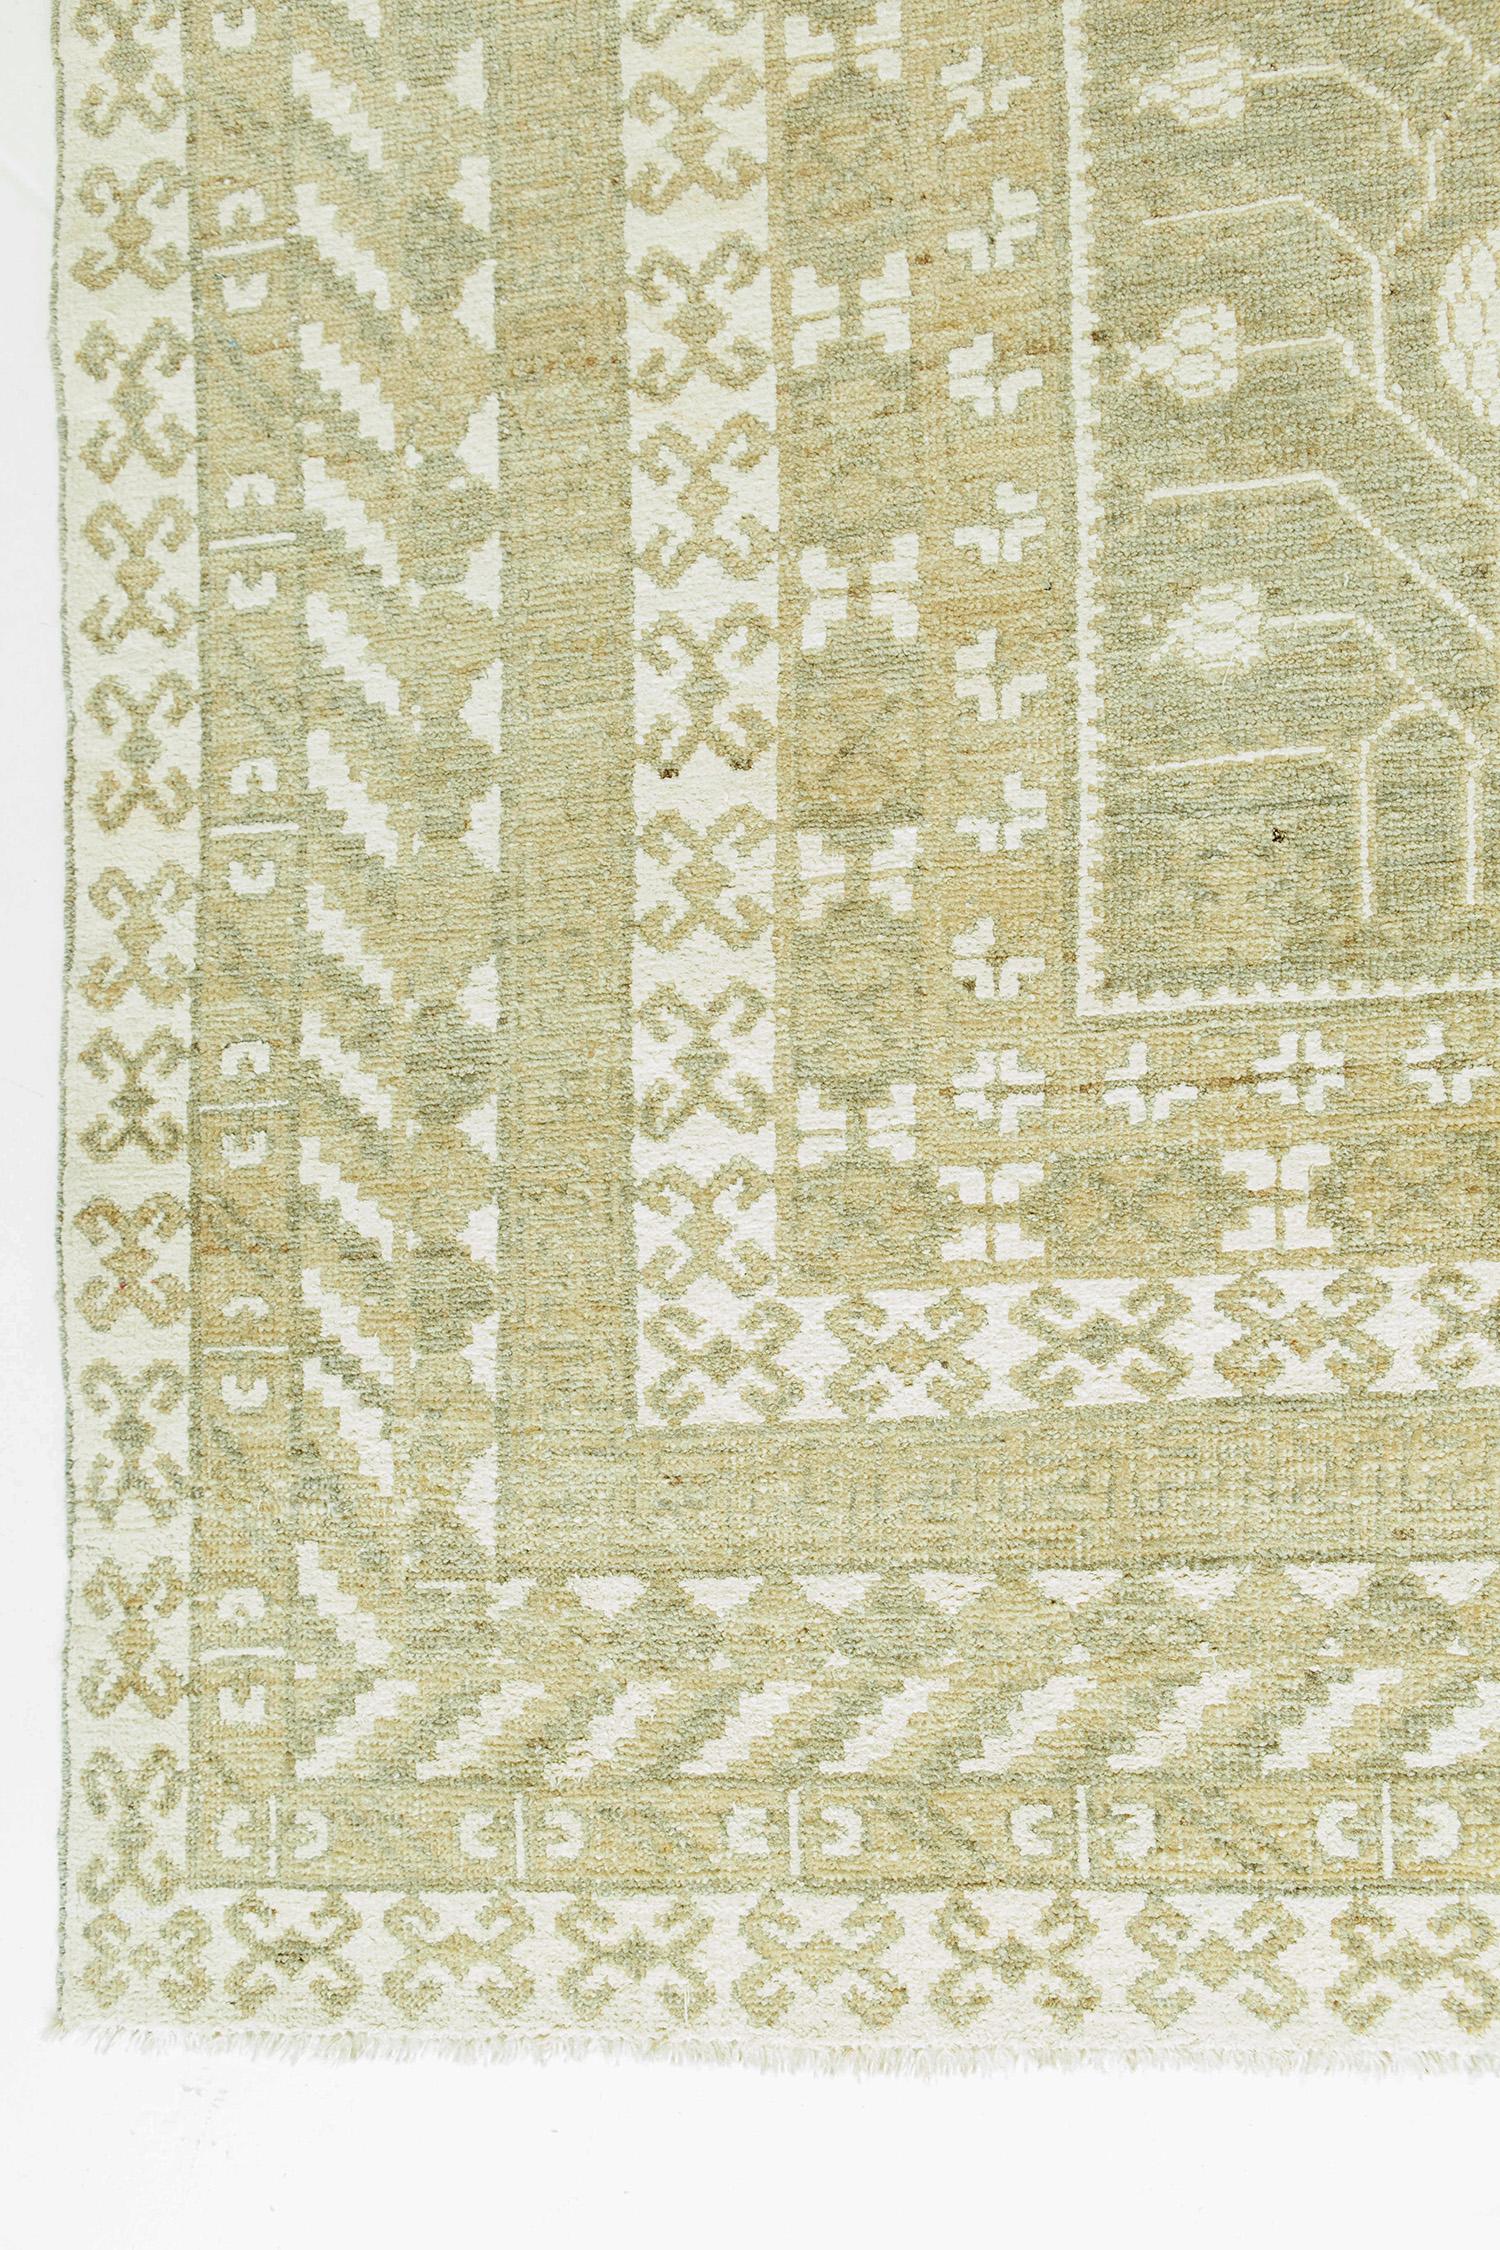 A beautiful traditional Khotan recreation featuring tribal pomegranate motifs and floral scrolls. The fascinating designs are depicted in ivory with a rich taupe background. The geometric patterns of Khotan rugs exude both sophistication and